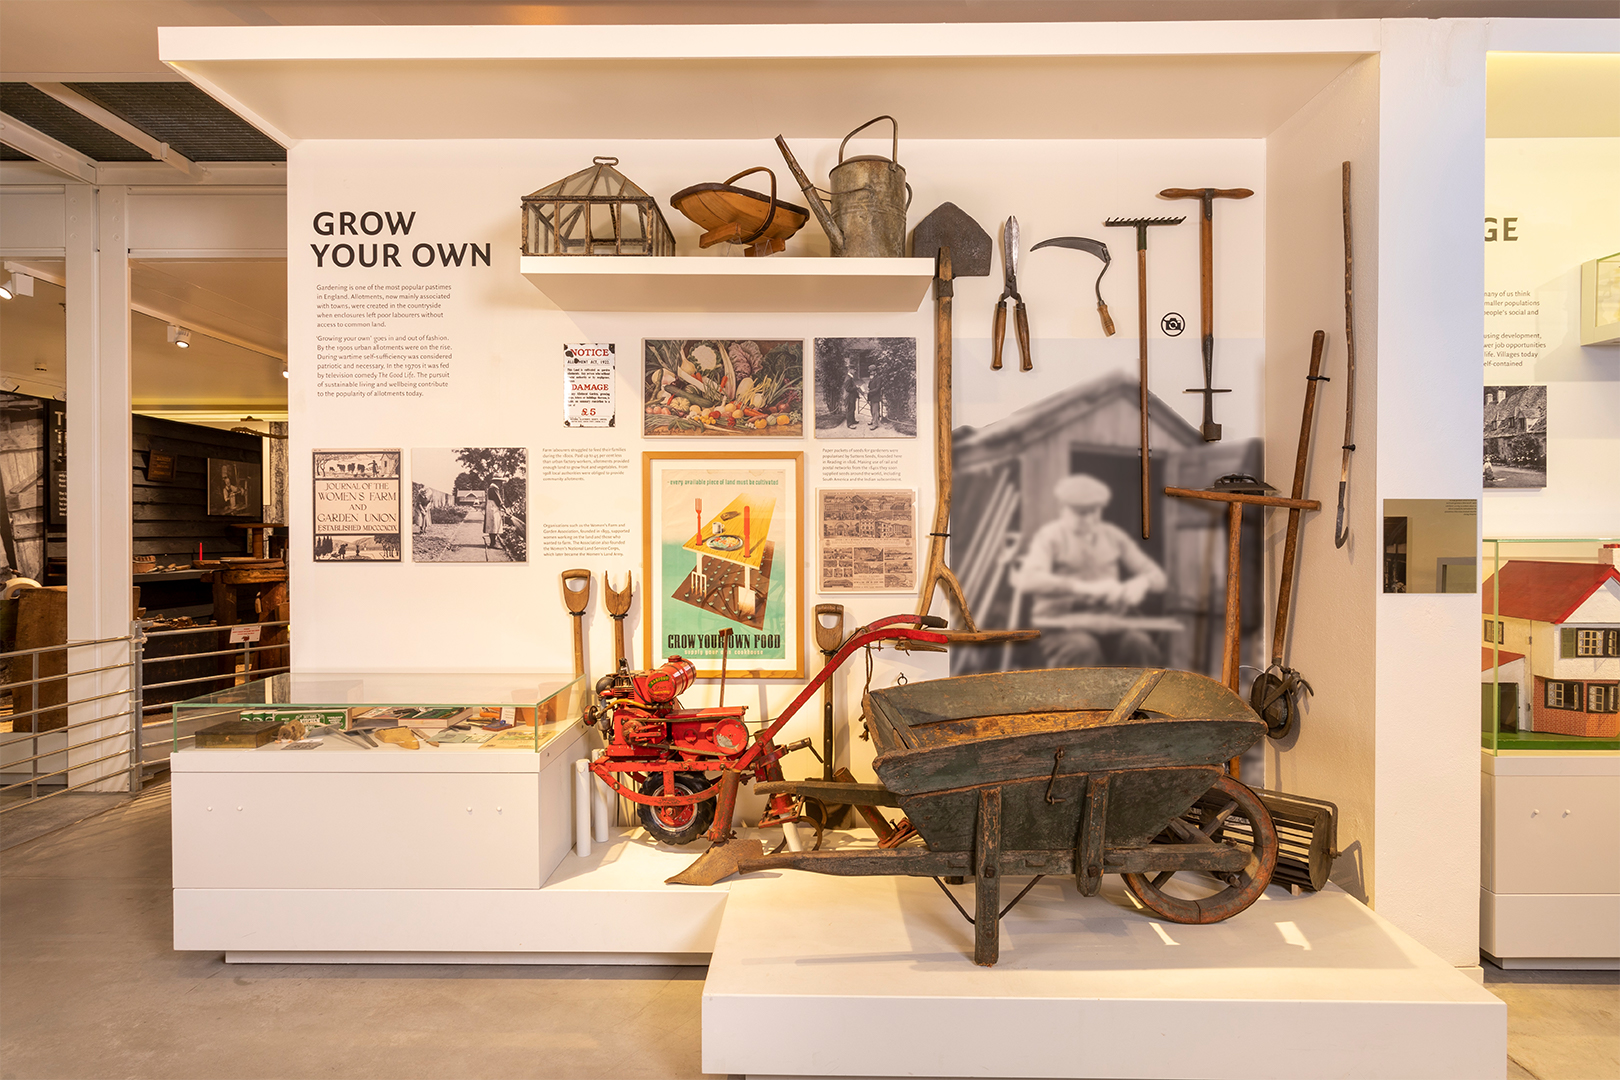 The Grow Your Own display in The MERL.